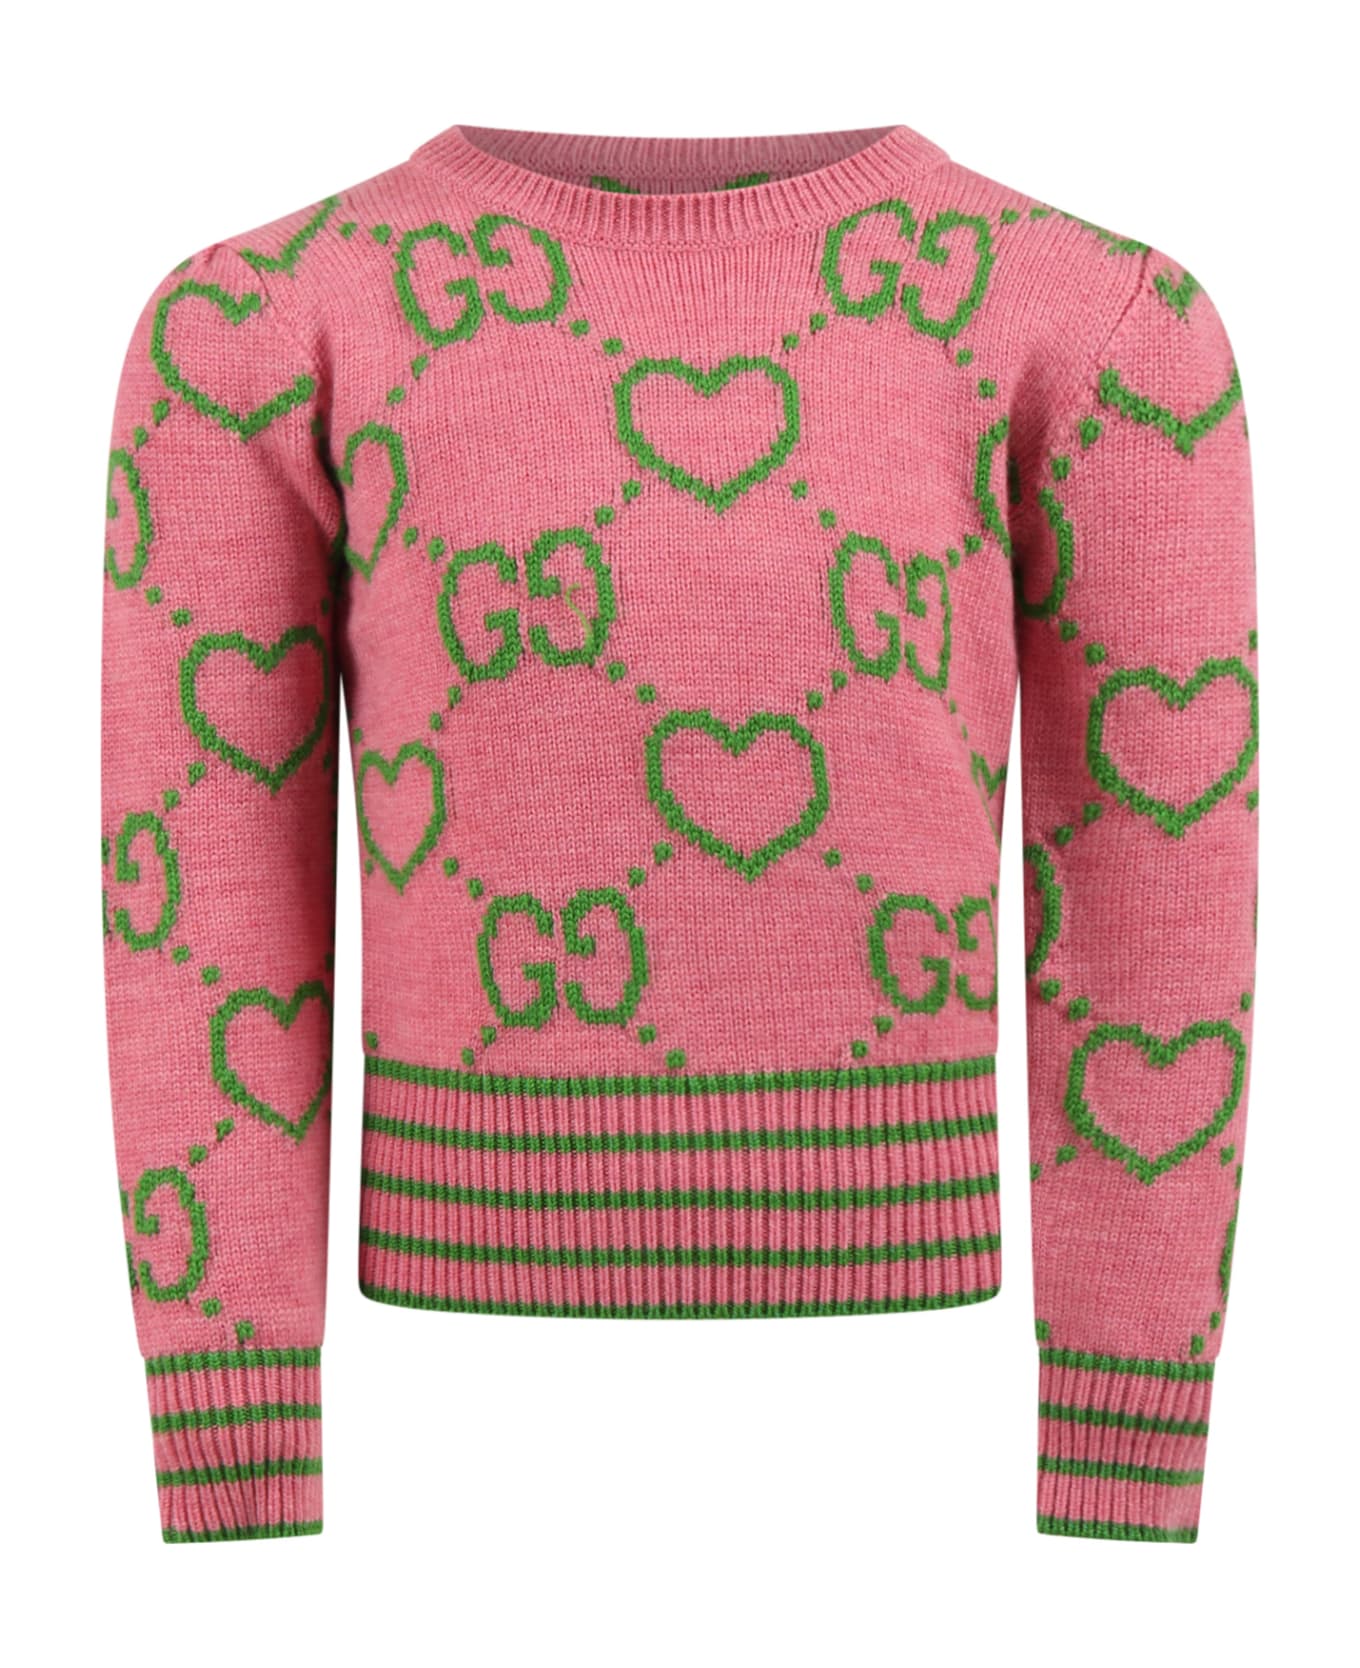 Gucci Pink Sweater For Girl With Iconic Green Gg - Pink